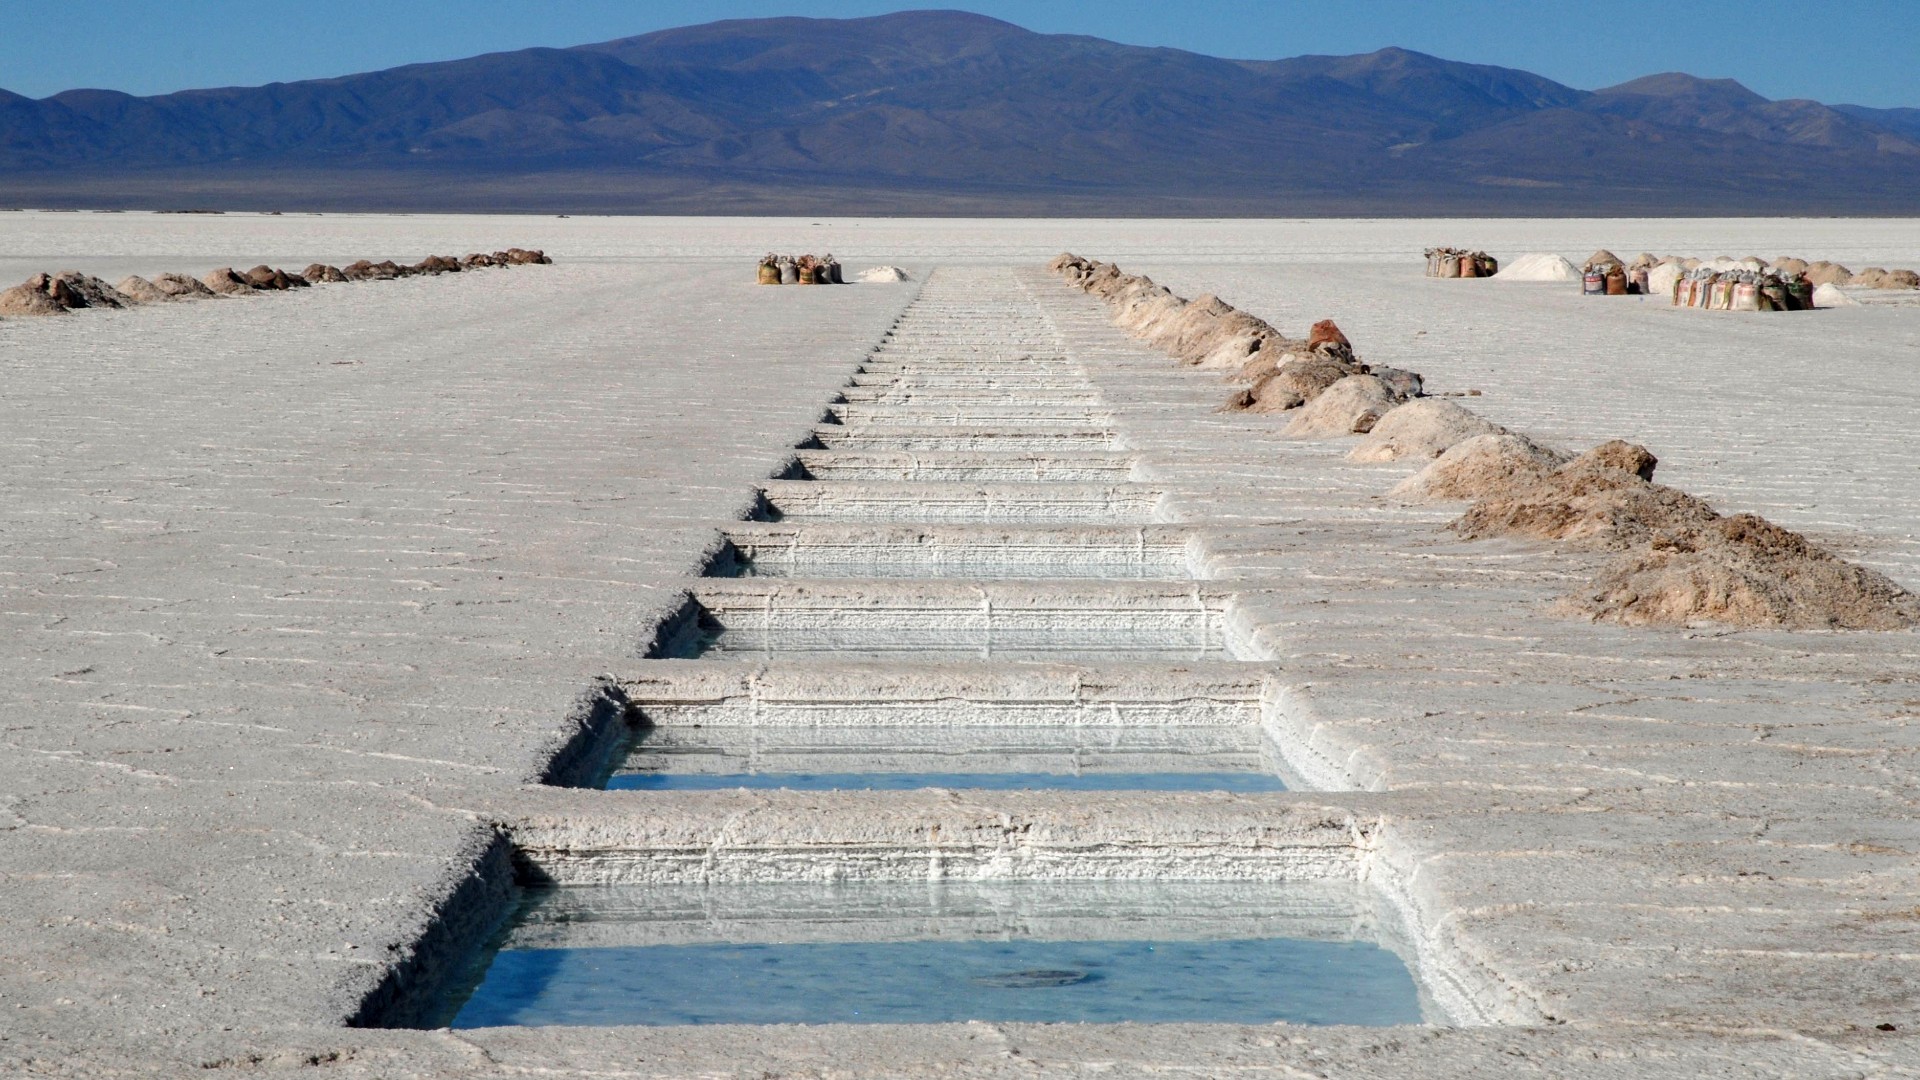 The lithium producer SQM obtained 585.5 million dollars in profits during 2021, equivalent to three times more than what was registered the previous year